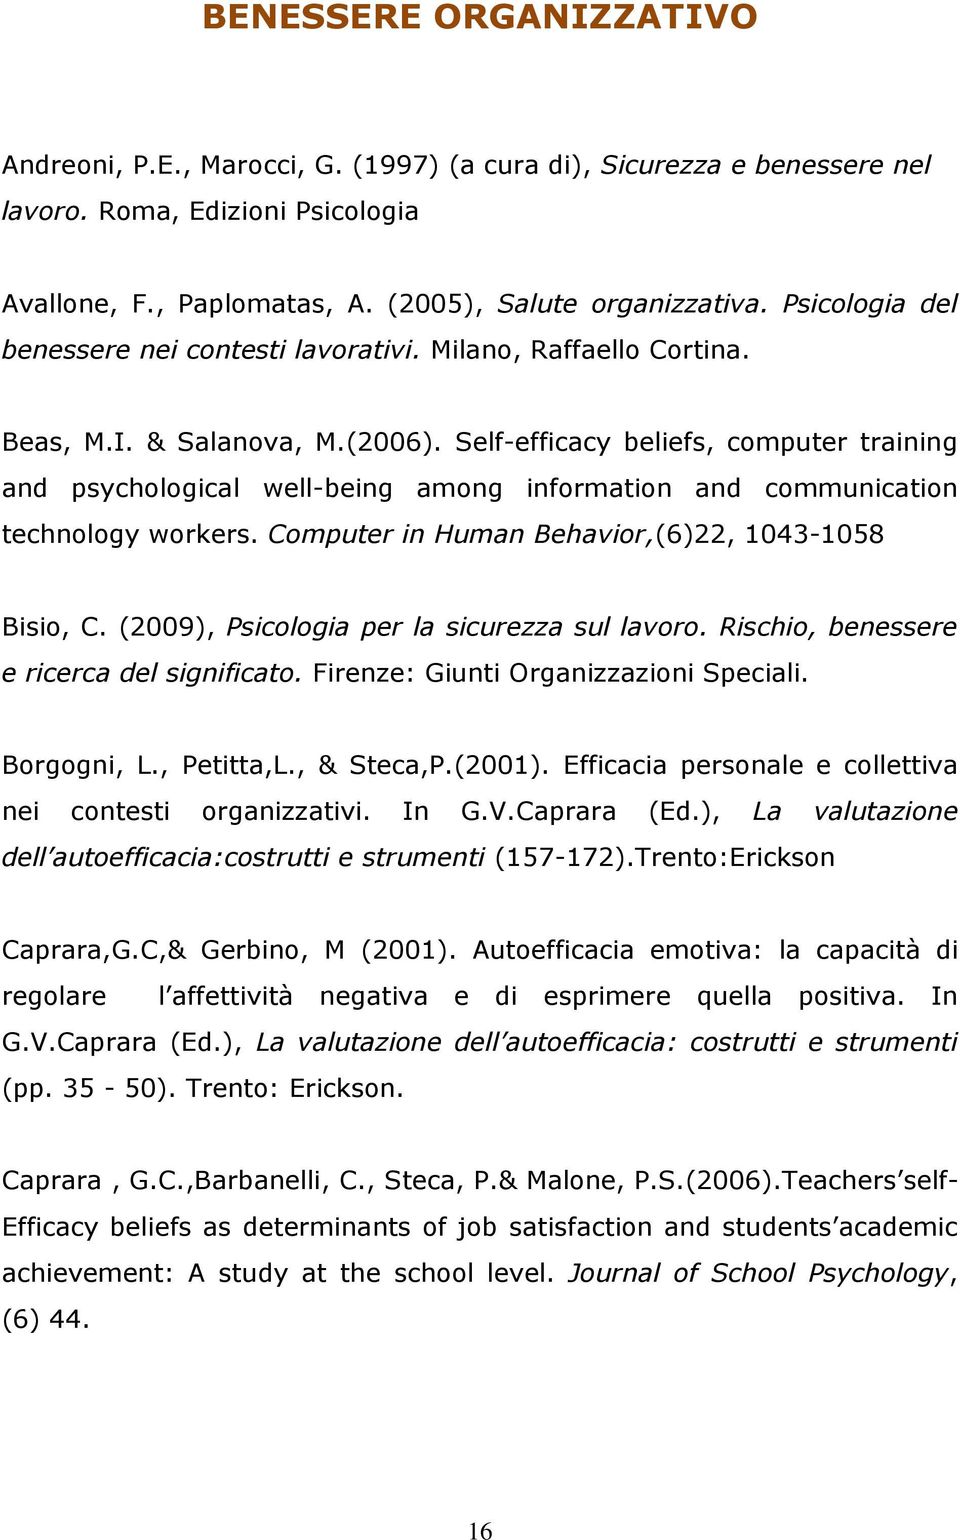 Self-efficacy beliefs, computer training and psychological well-being among information and communication technology workers. Computer in Human Behavior,(6)22, 1043-1058 Bisio, C.